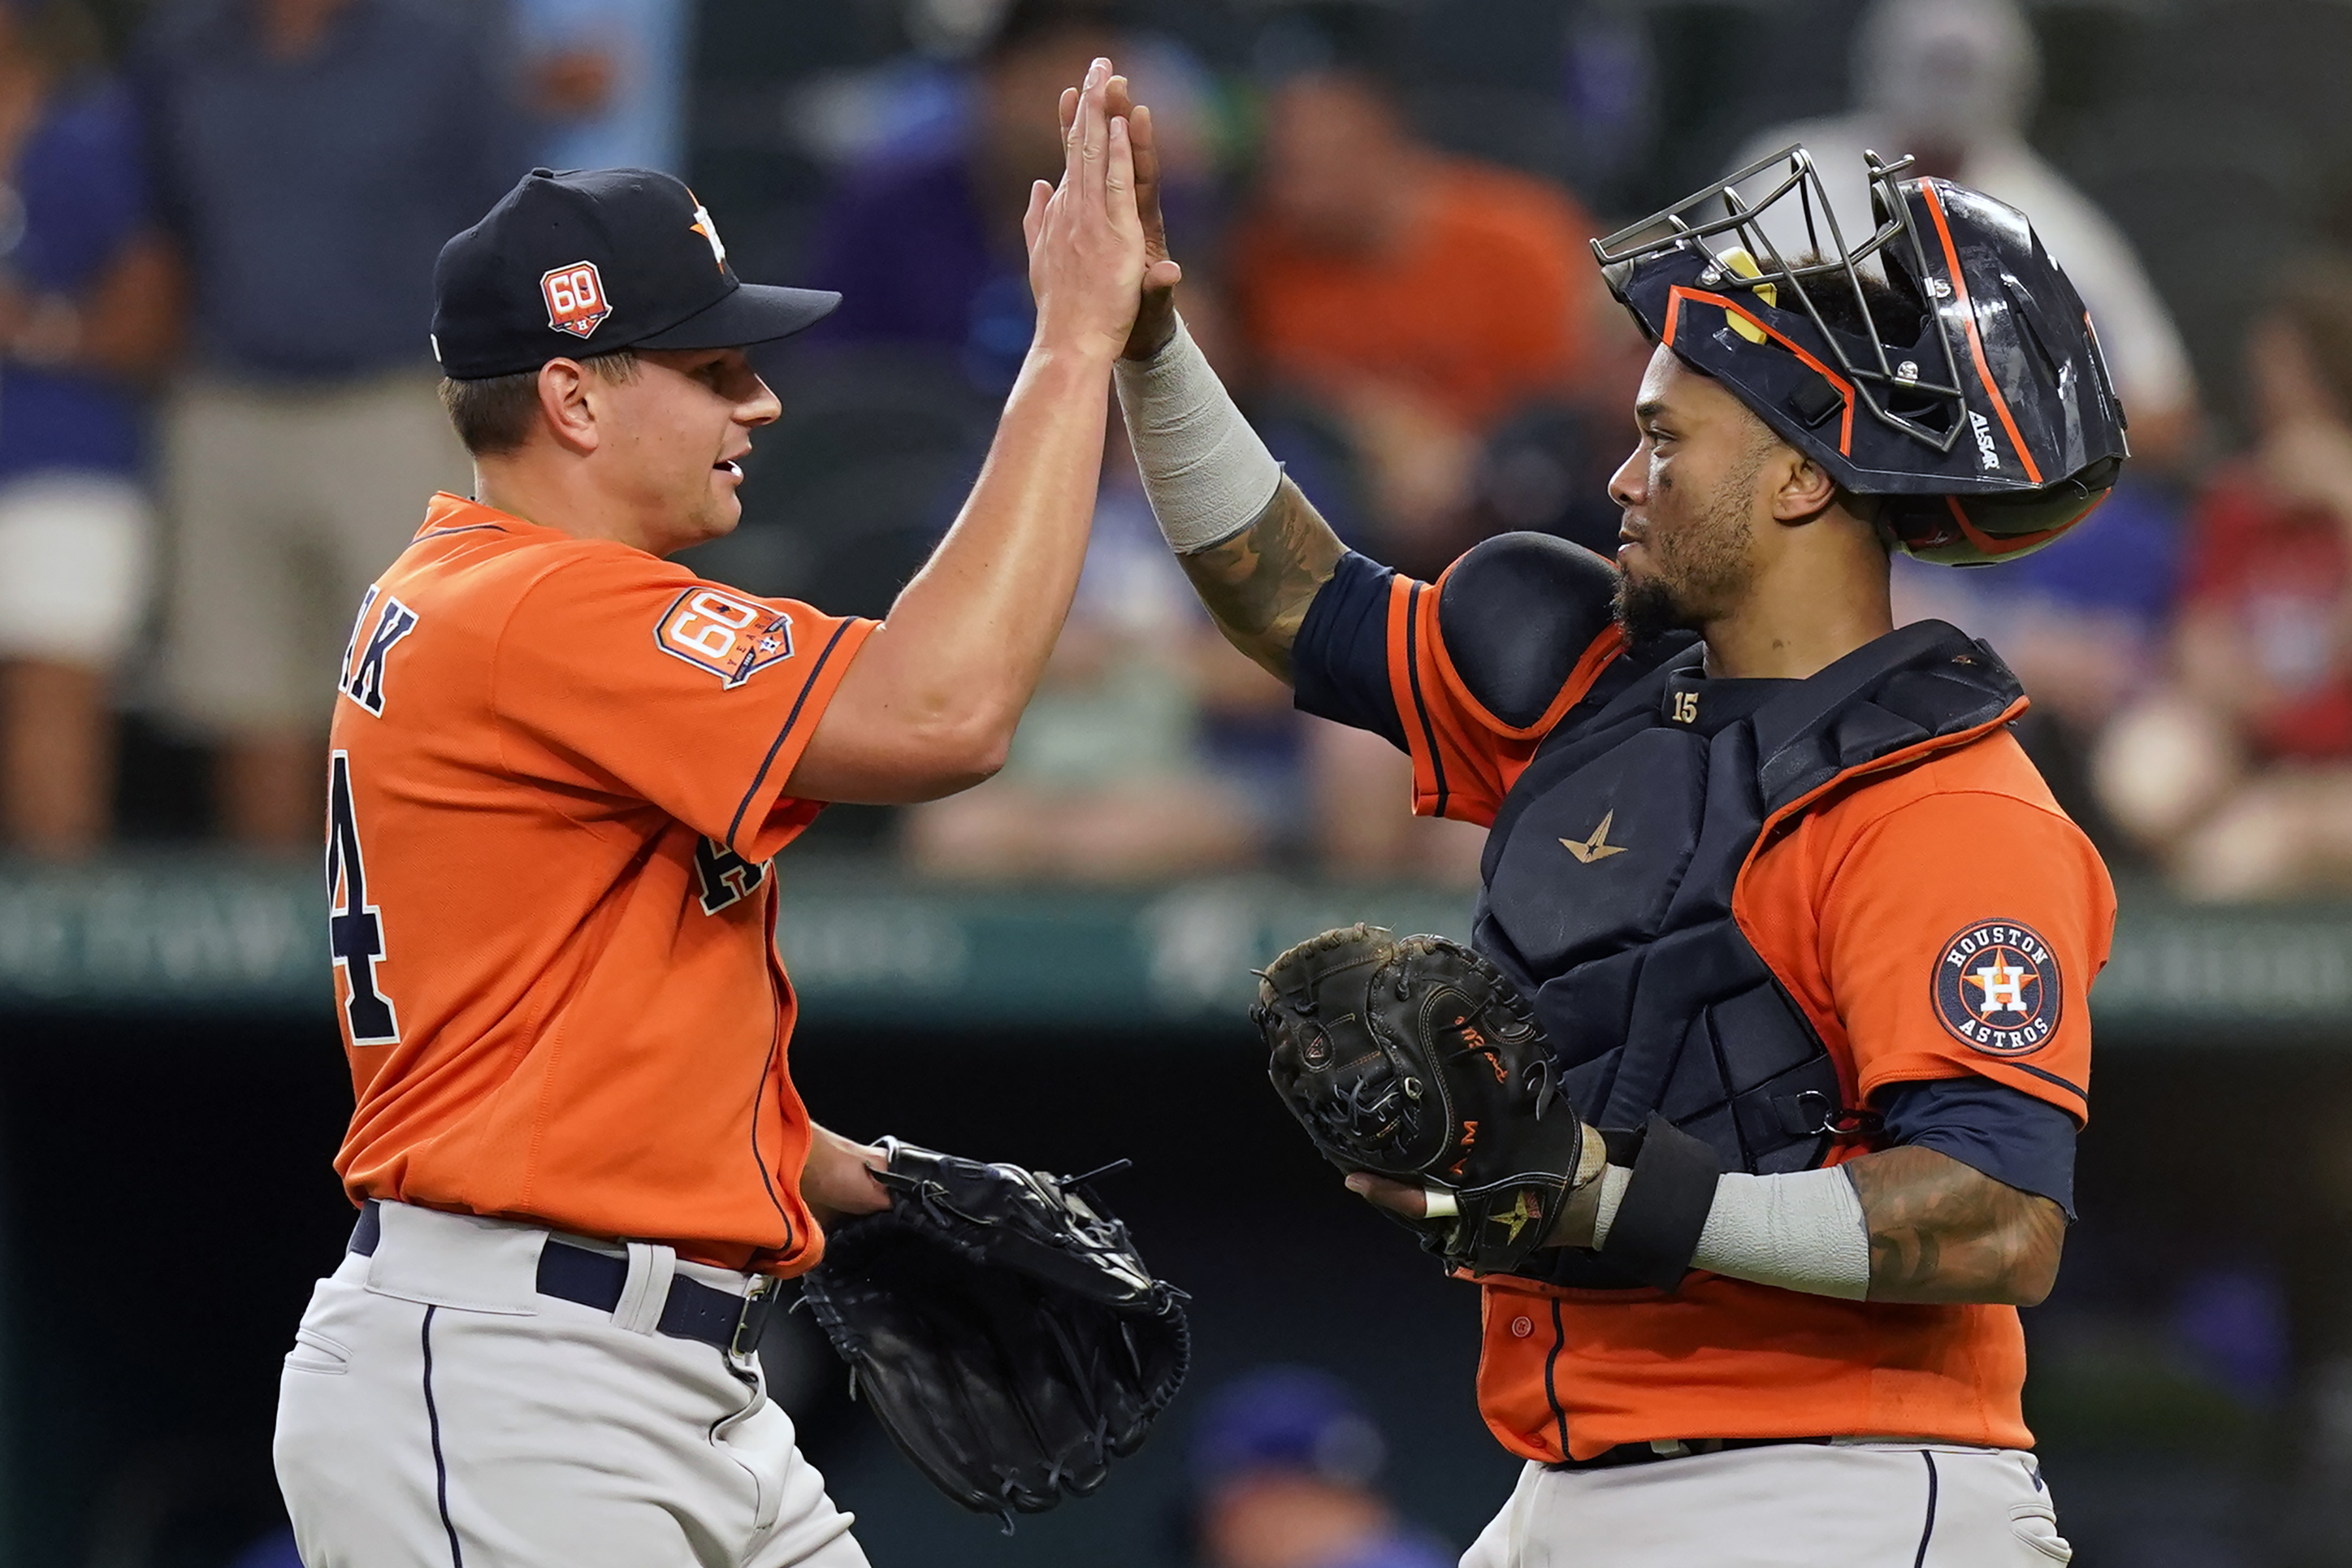 White Sox vs. Astros prediction, betting odds for MLB on Friday 